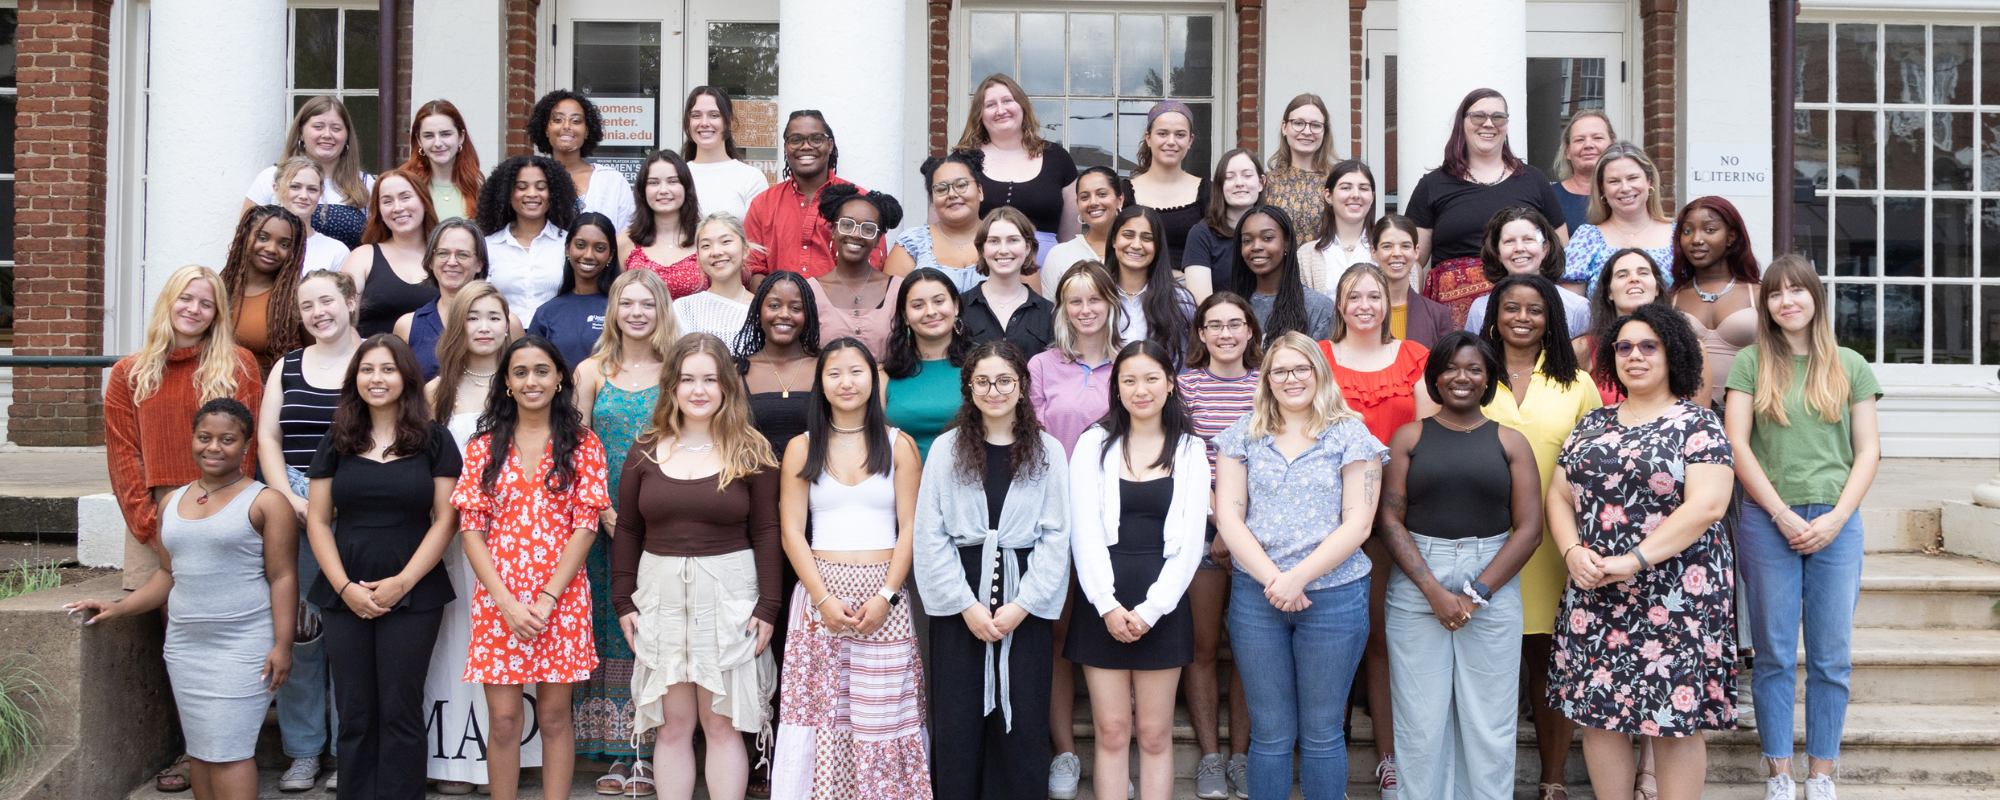 interns and staff in front of the women's center